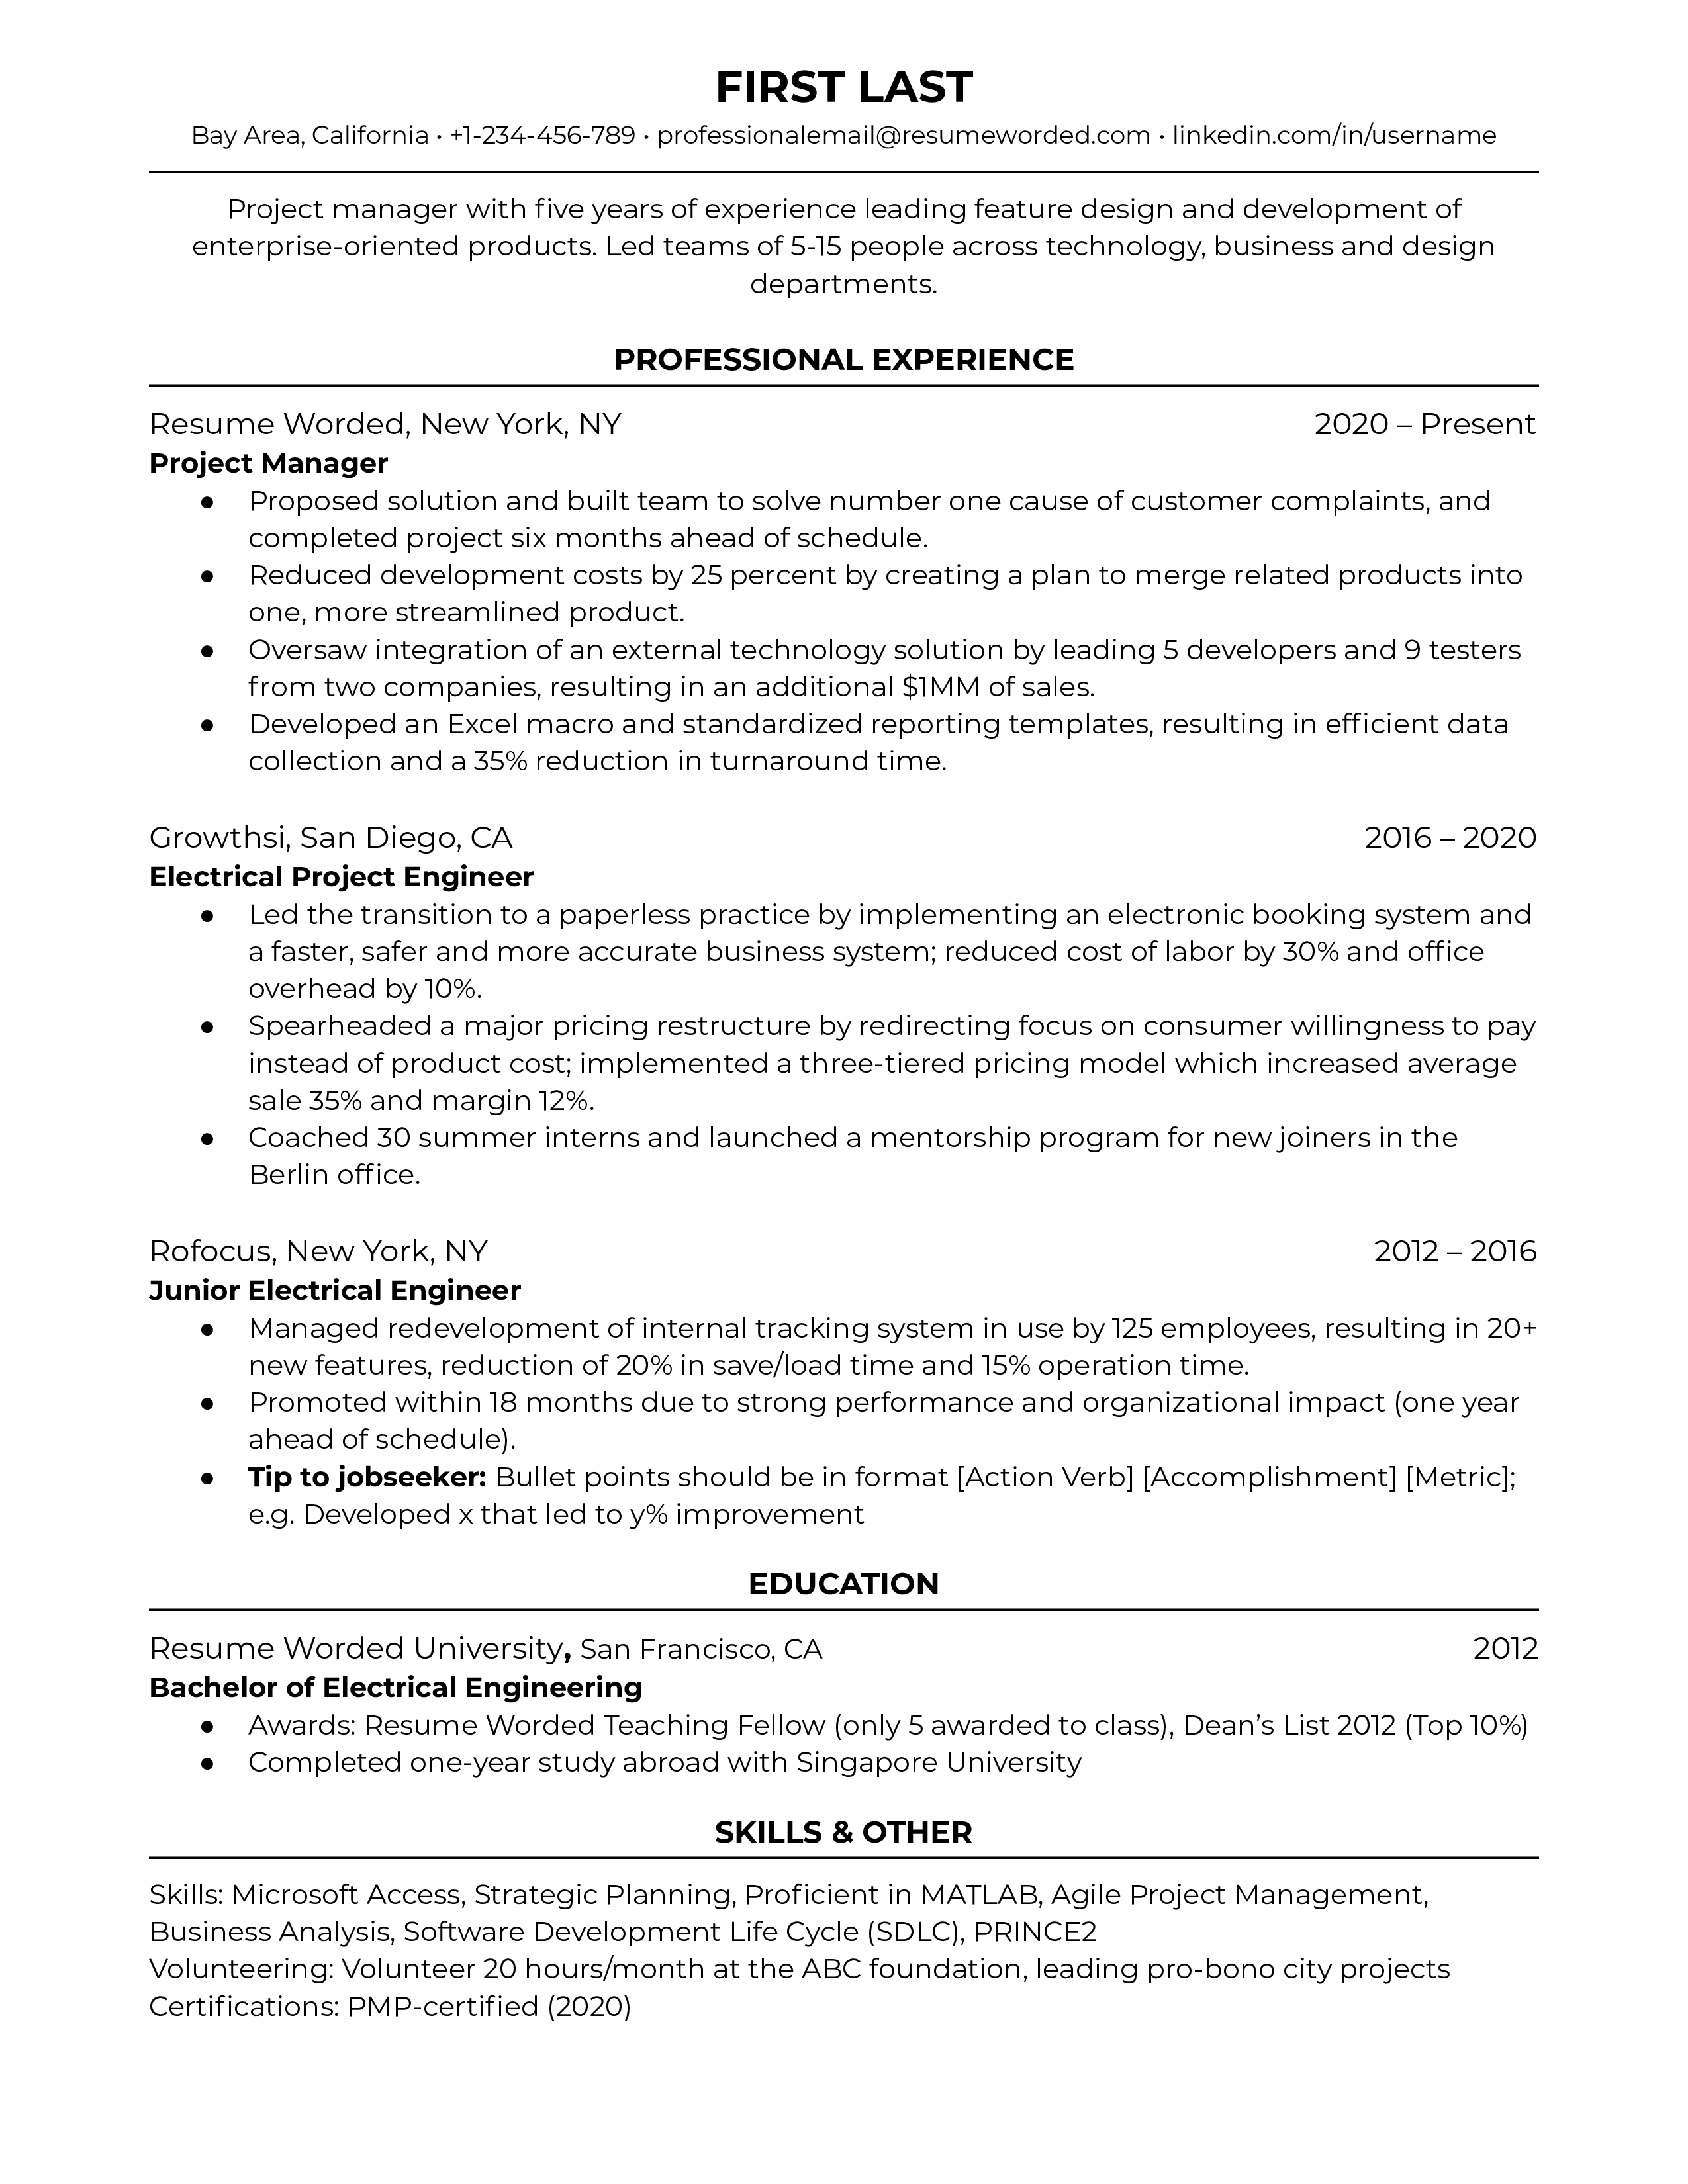 Project manager resume template with bullet points, relevant skills, and strong action verbs.